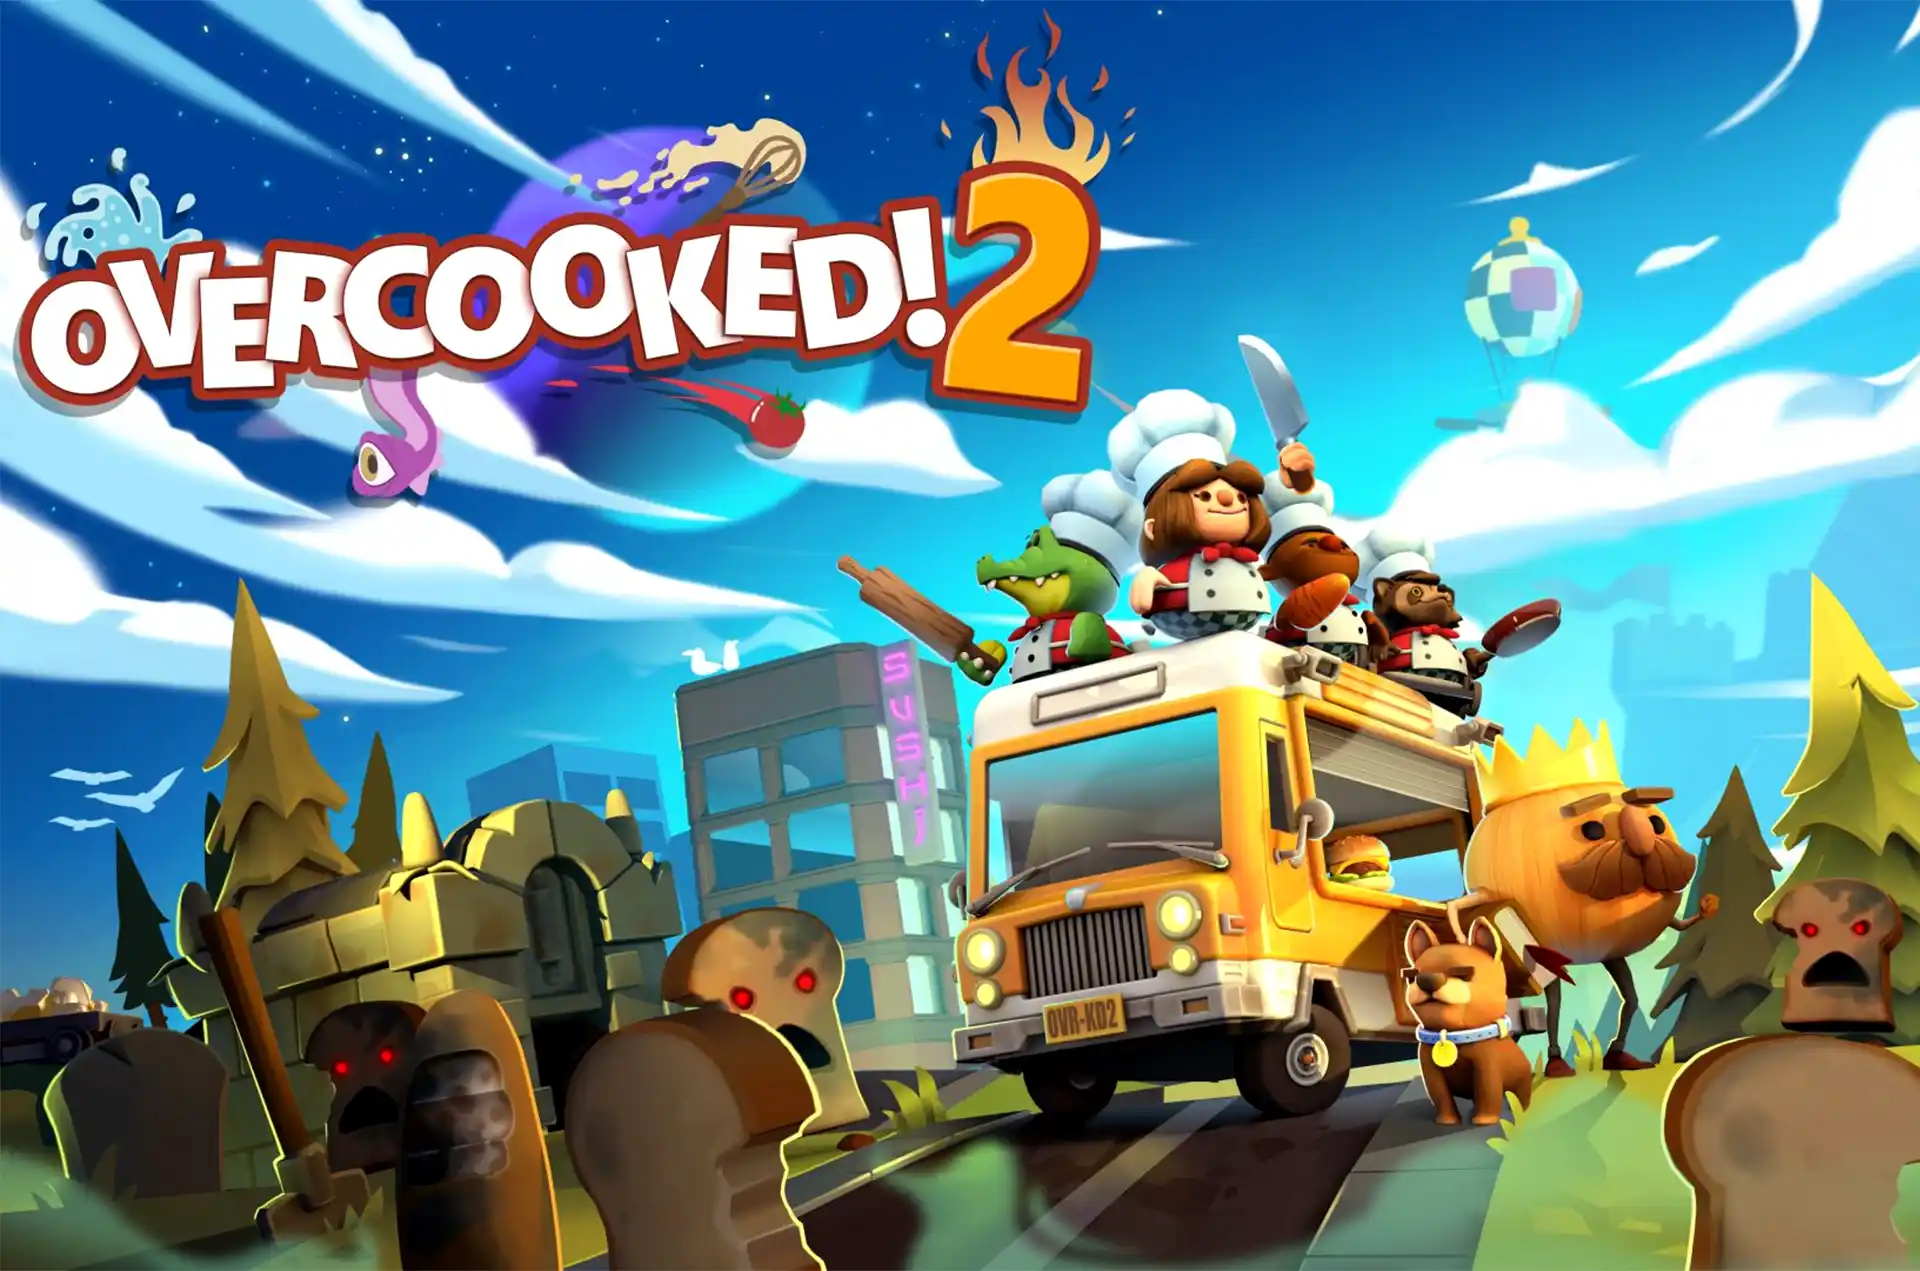 Presenting you Overcooked 2